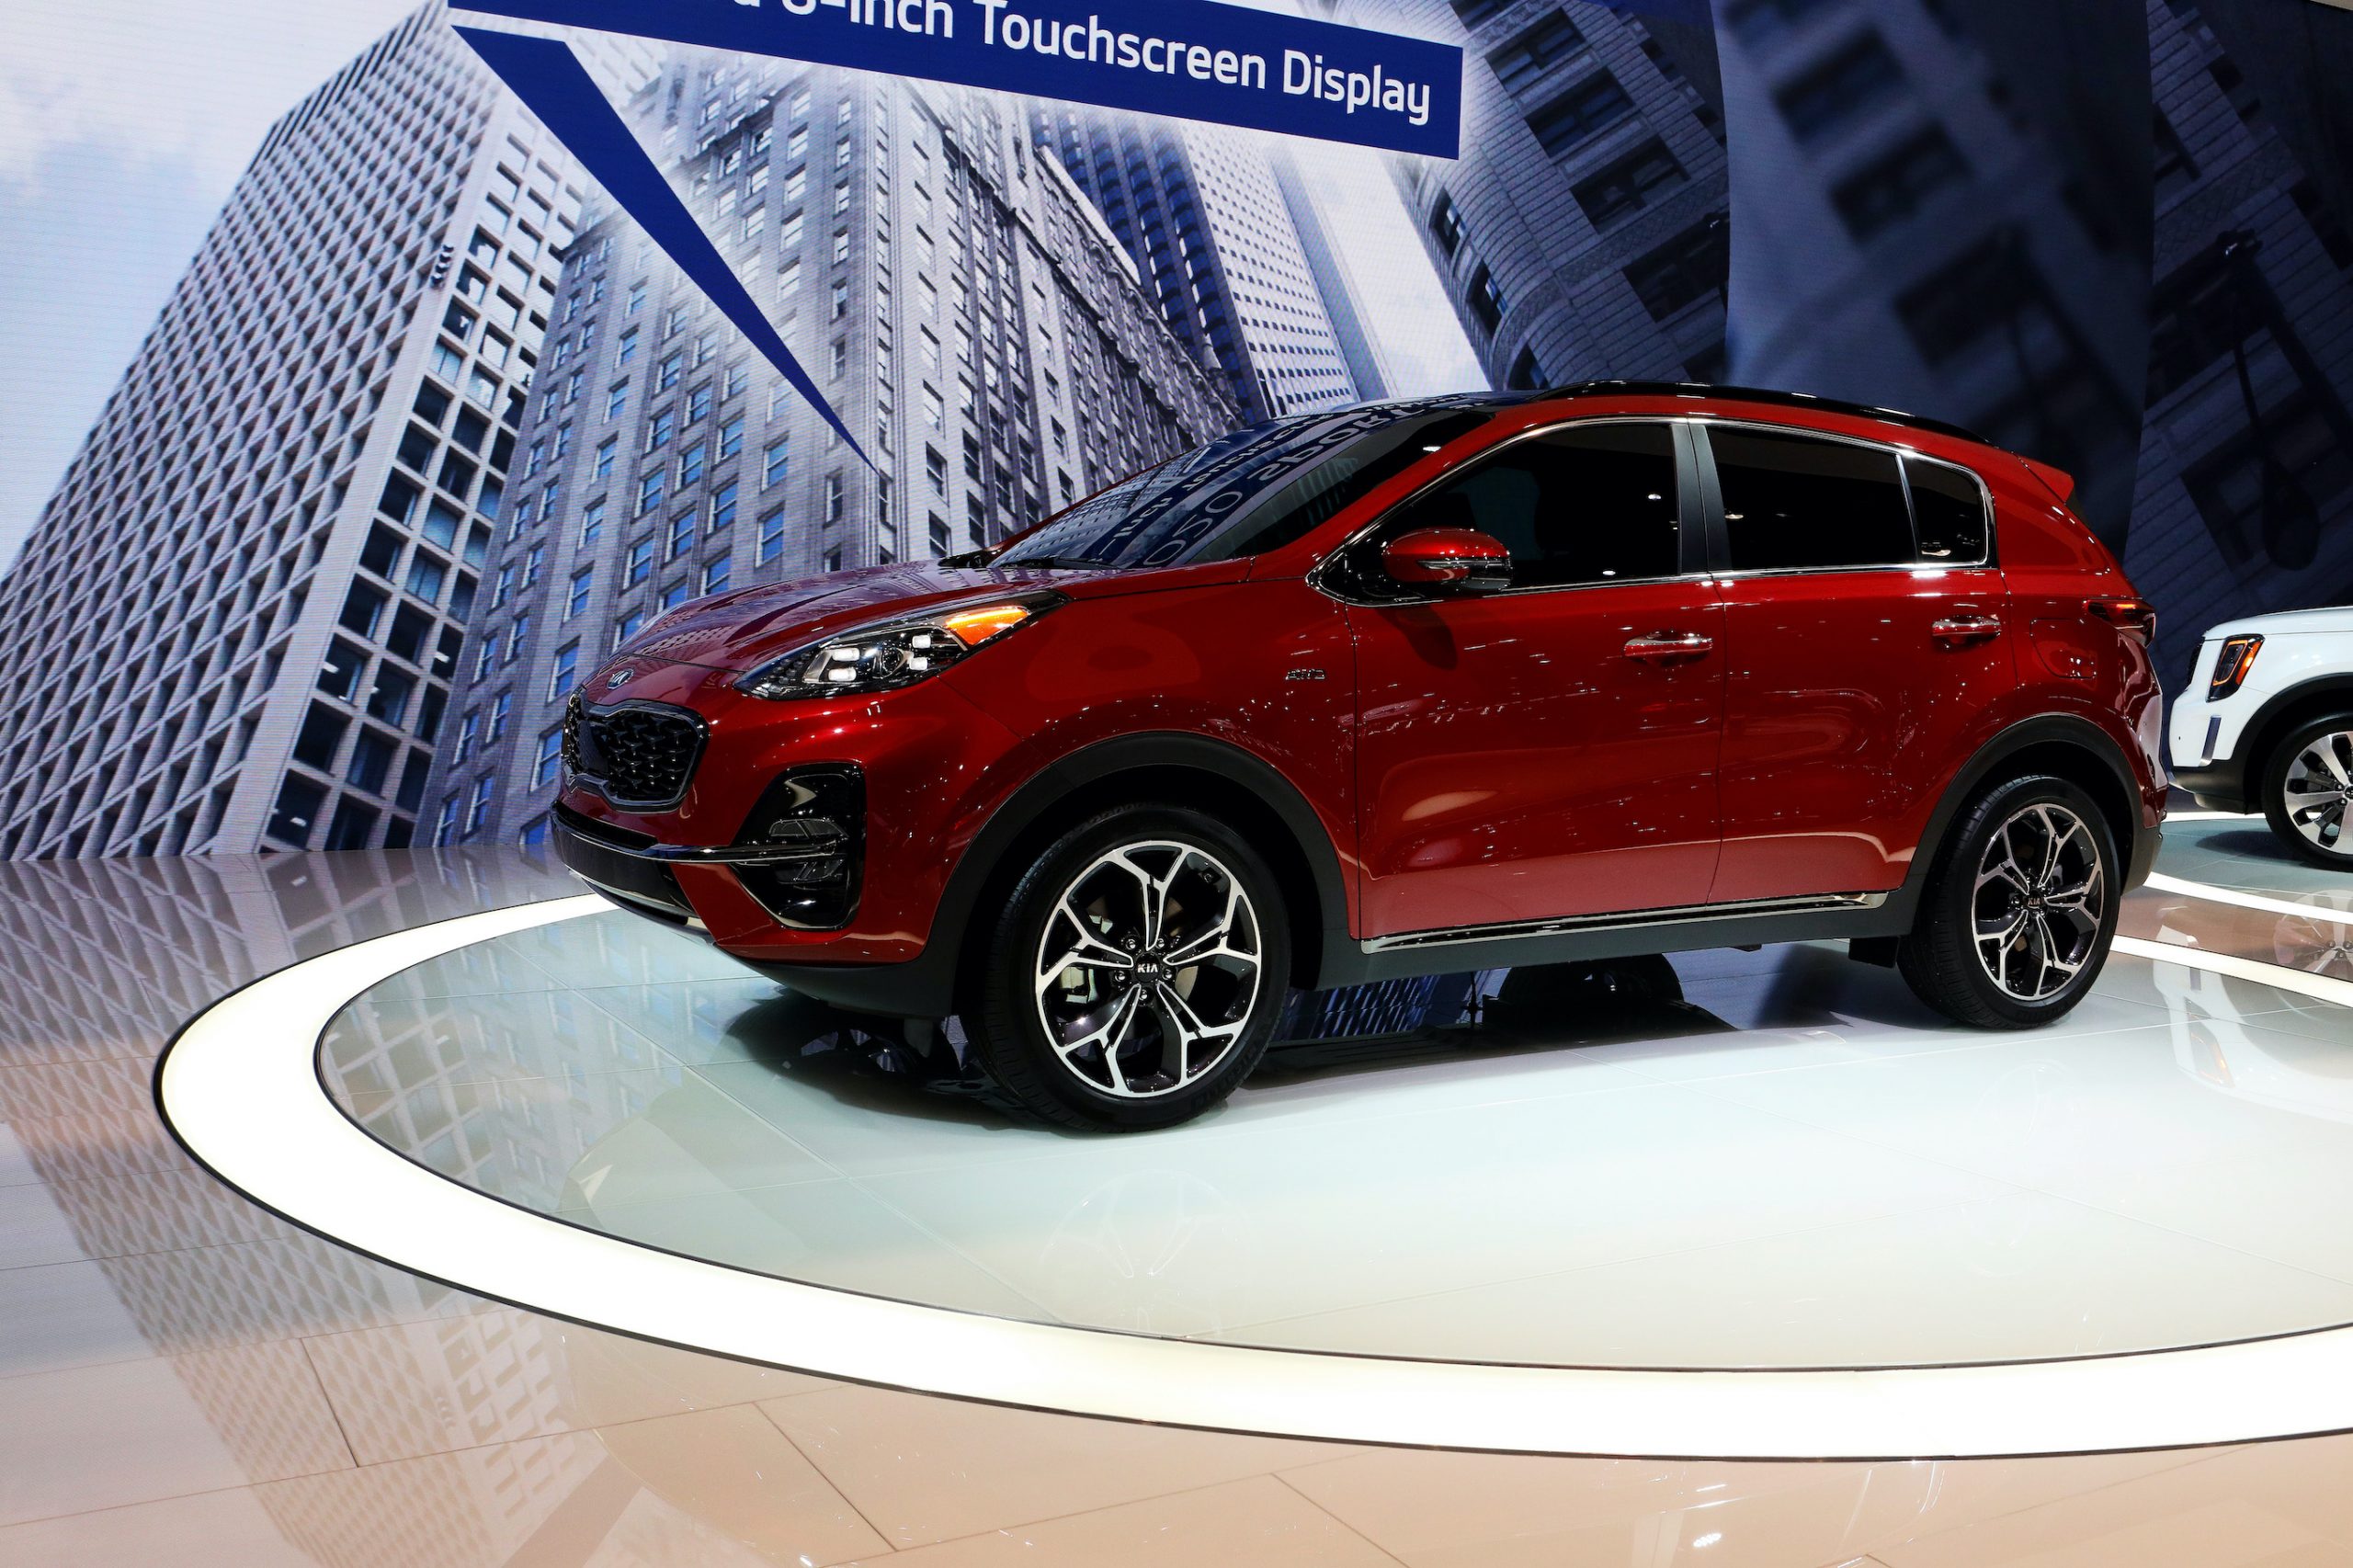 2020 Kia Sportage is on display at the 111th Annual Chicago Auto Show